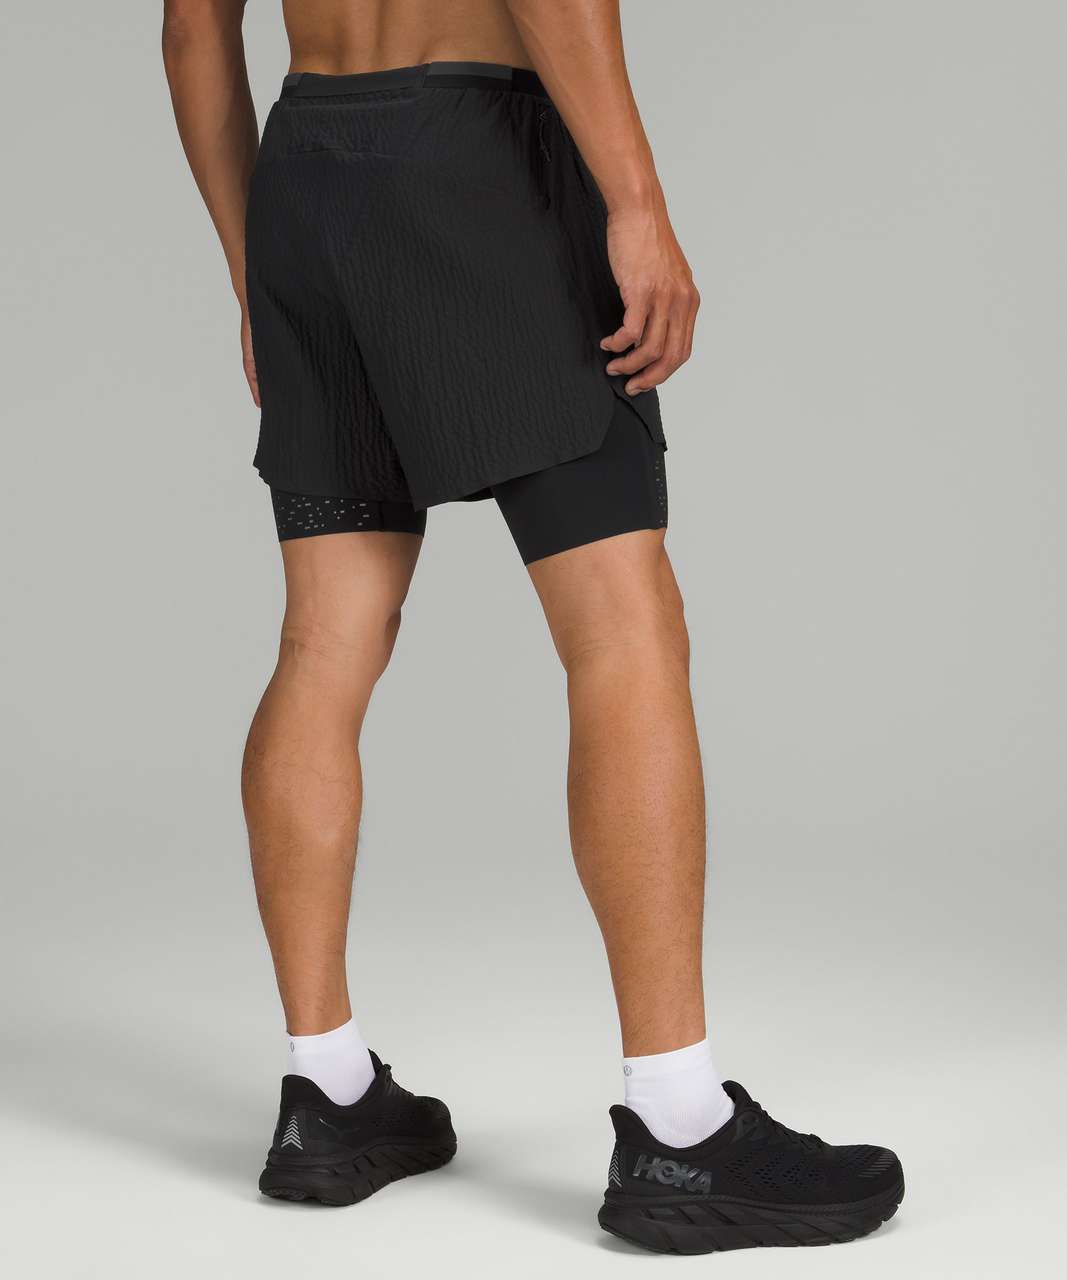 Lululemon Surge Lined Short 6" *Special Edition - Black / Inflect Textured Raw Linen Multi